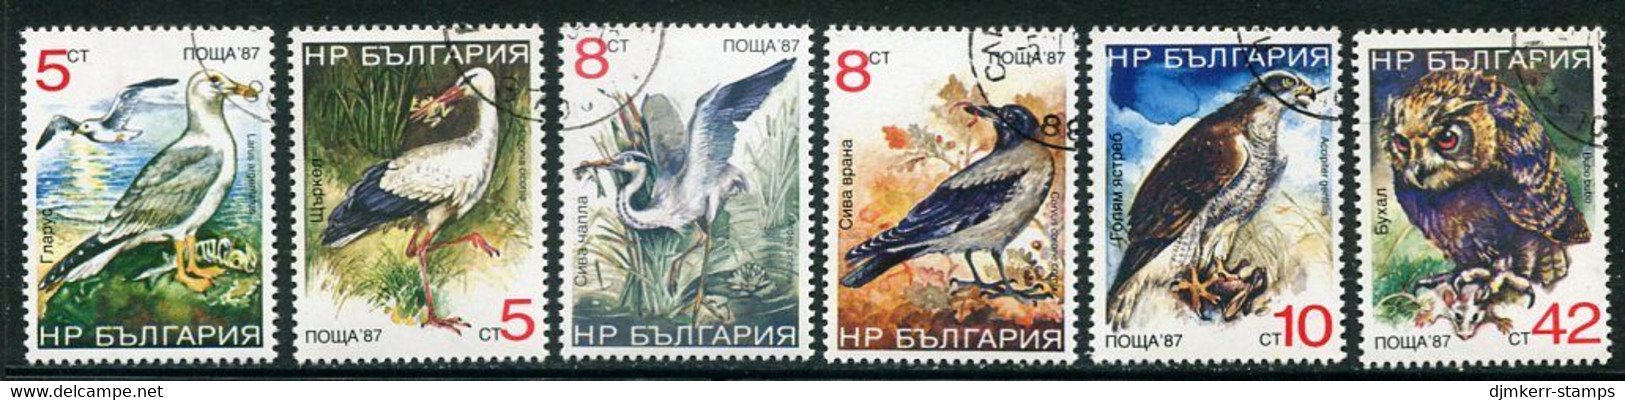 BULGARIA 1988 Birds Used.  Michel 3689-94 - Used Stamps